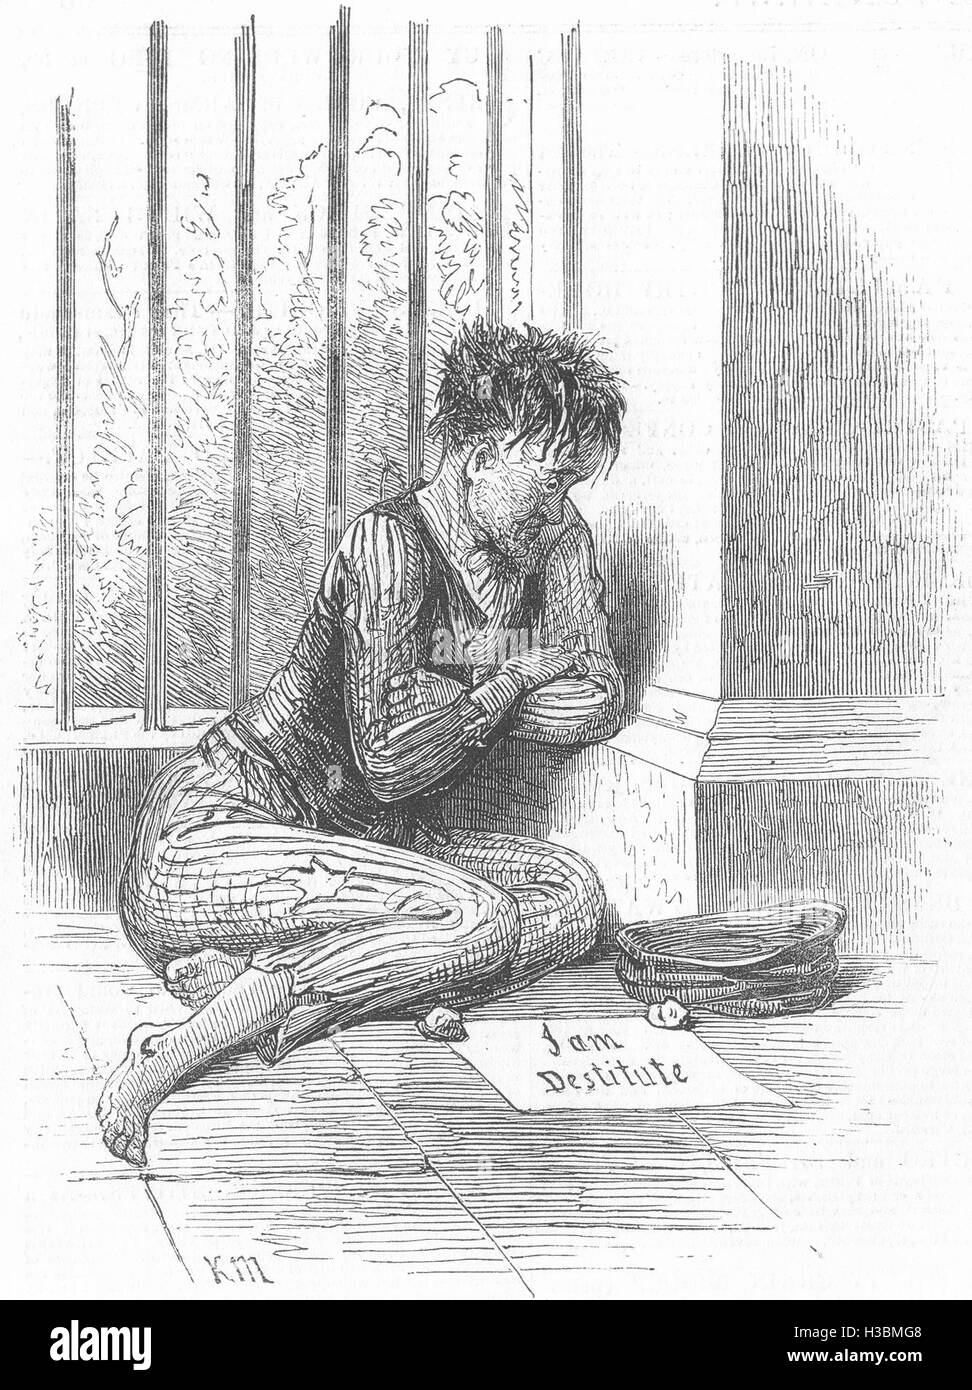 PORTRAITS 'The Inscription on the Pavement' I am destitute. 1849. The Illustrated London News Stock Photo